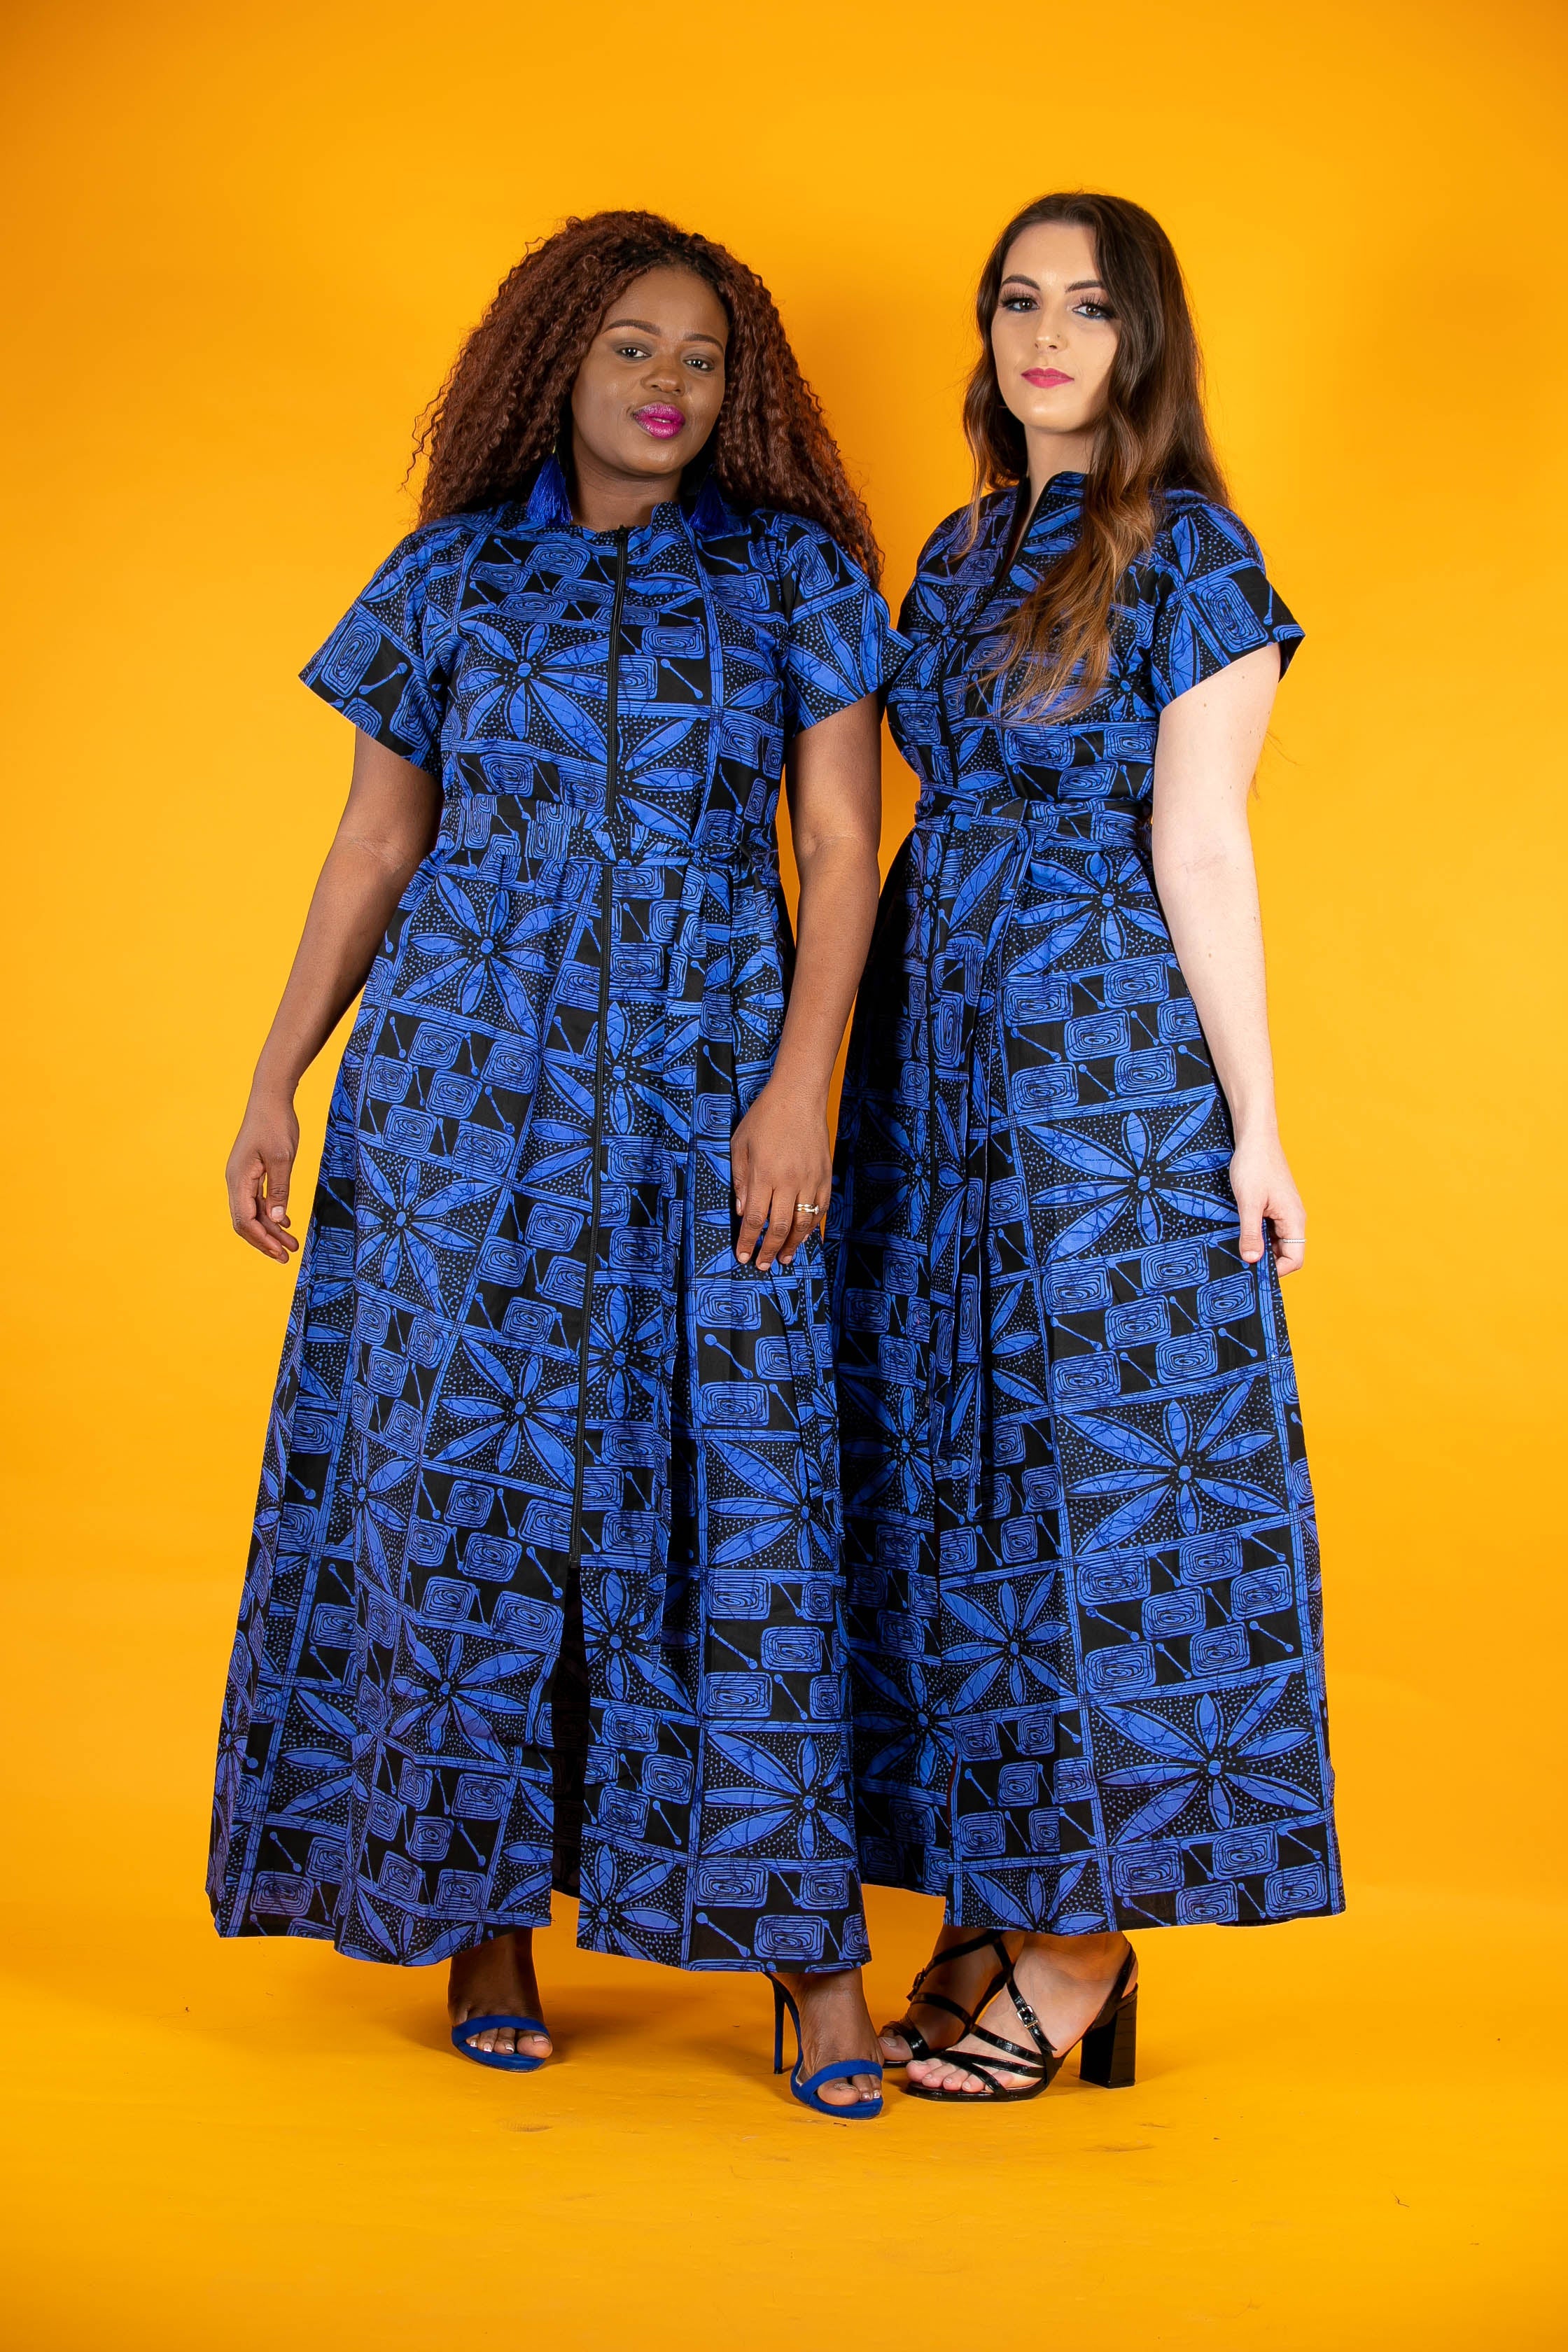 temad collections african print ankara front zip maxi dress with pockets, Stylish African print dresses, Modern African dresses, Ankara dress for ladies, Latest Ankara dresses, Long Ankara dresses, ankara dresses Uk. Ankara dresses styles, stylish Ankara dresses, beautiful African dresses, African Ankara dresses for ladies, African dresses styles, ankara print, ankara maxi dresses,Ankara midi dresses, Ankara short dresses, African maxi dress, , African midi dress, , African short dress 